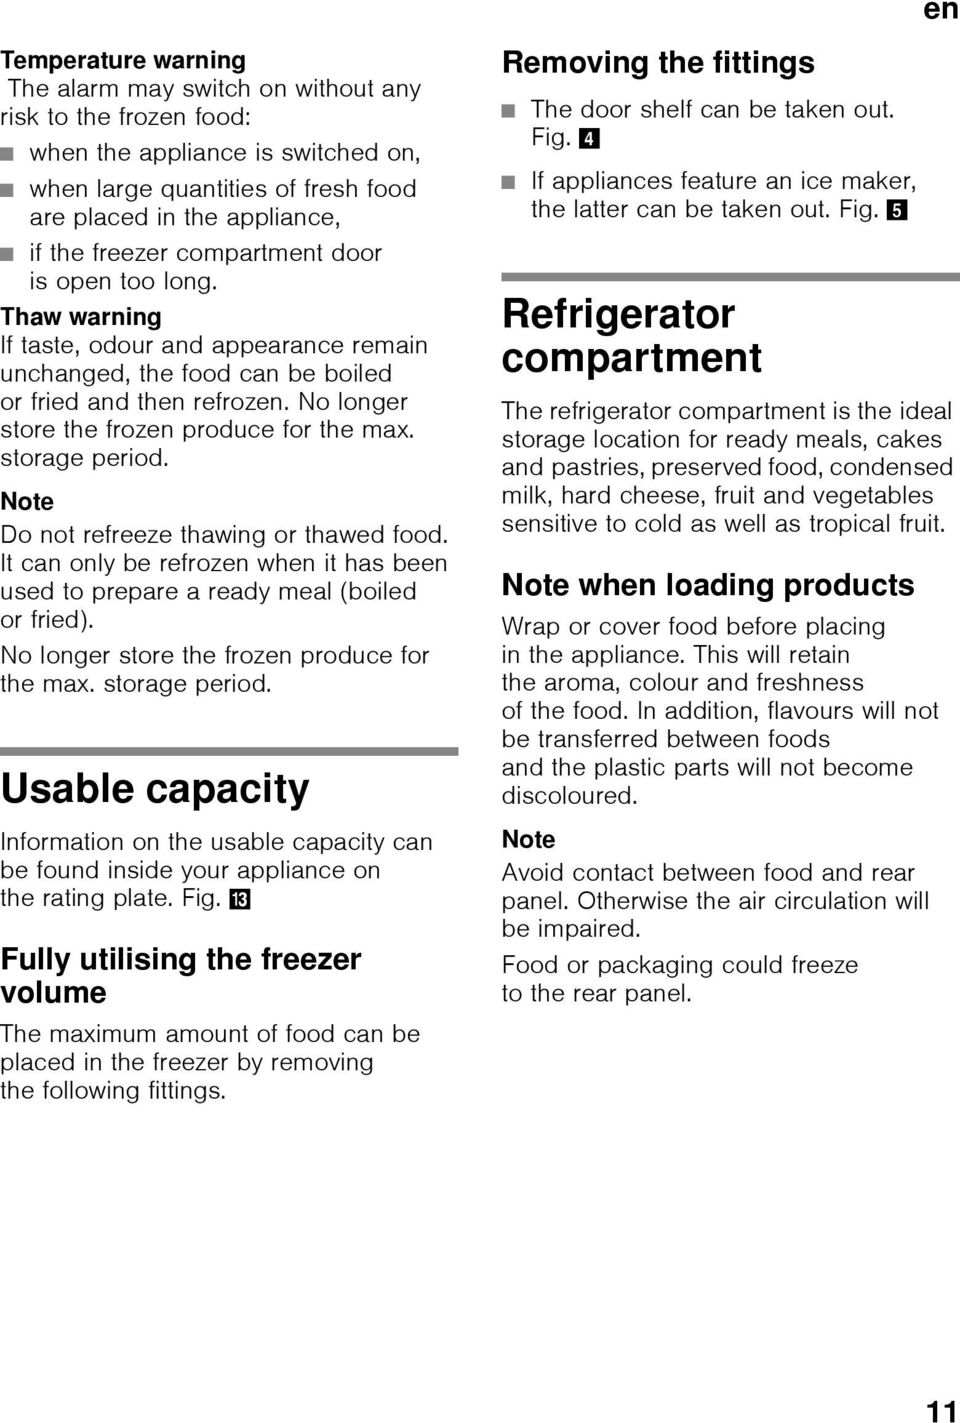 storage period. Note Do not refreeze thawing or thawed food. It can only be refrozen when it has been used to prepare a ready meal (boiled or fried). No longer store the frozen produce for the max.